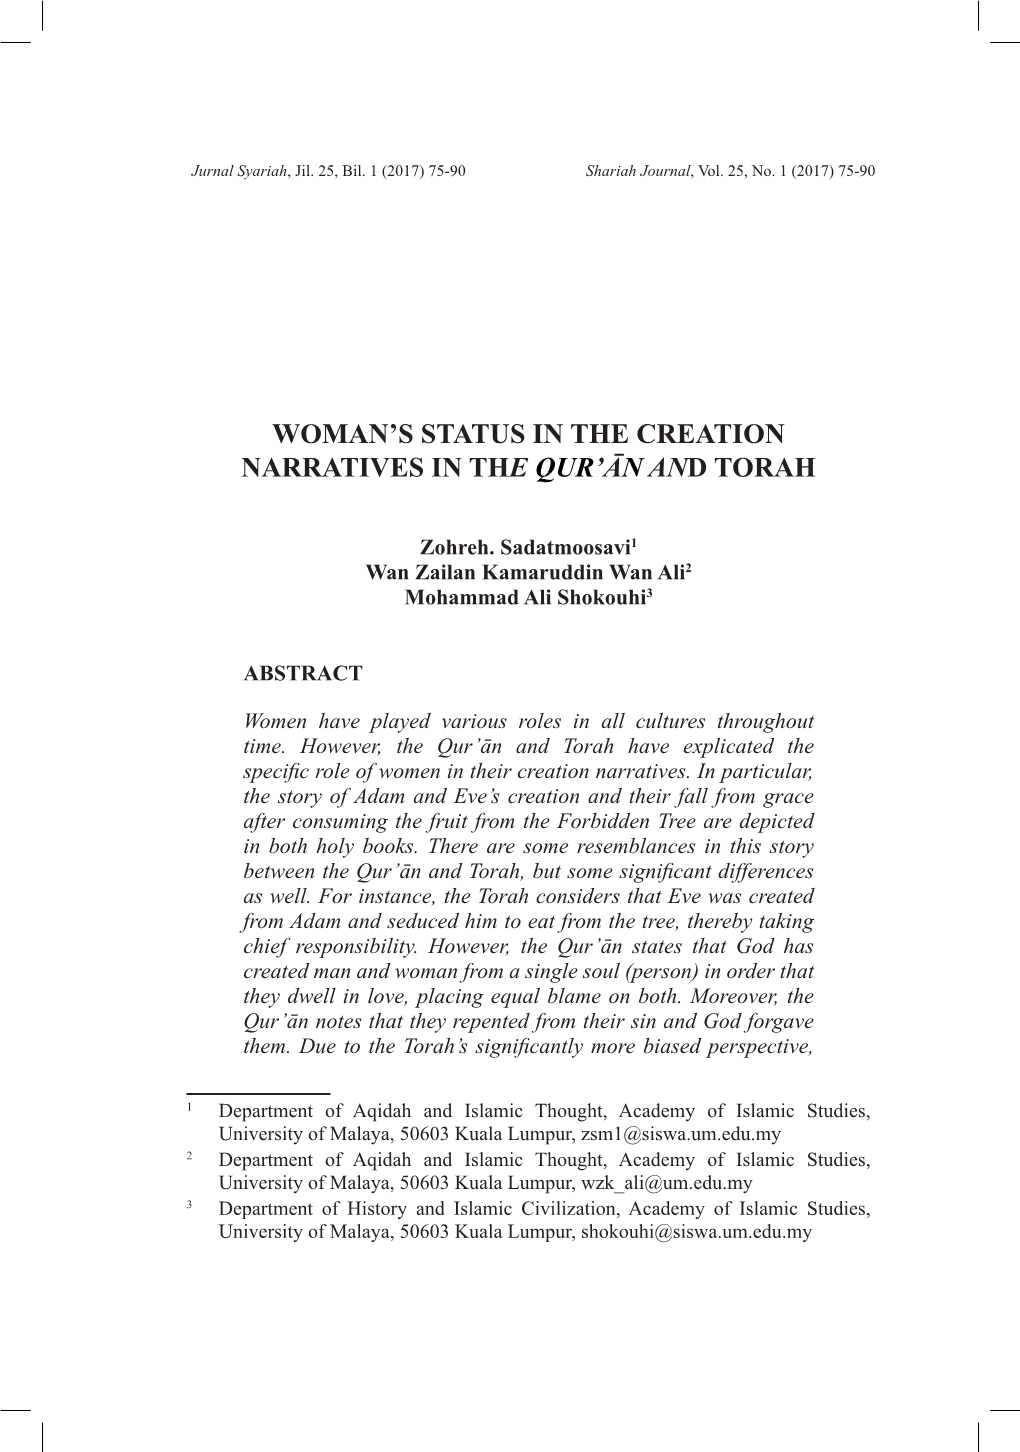 Woman's Status in the Creation Narratives in The